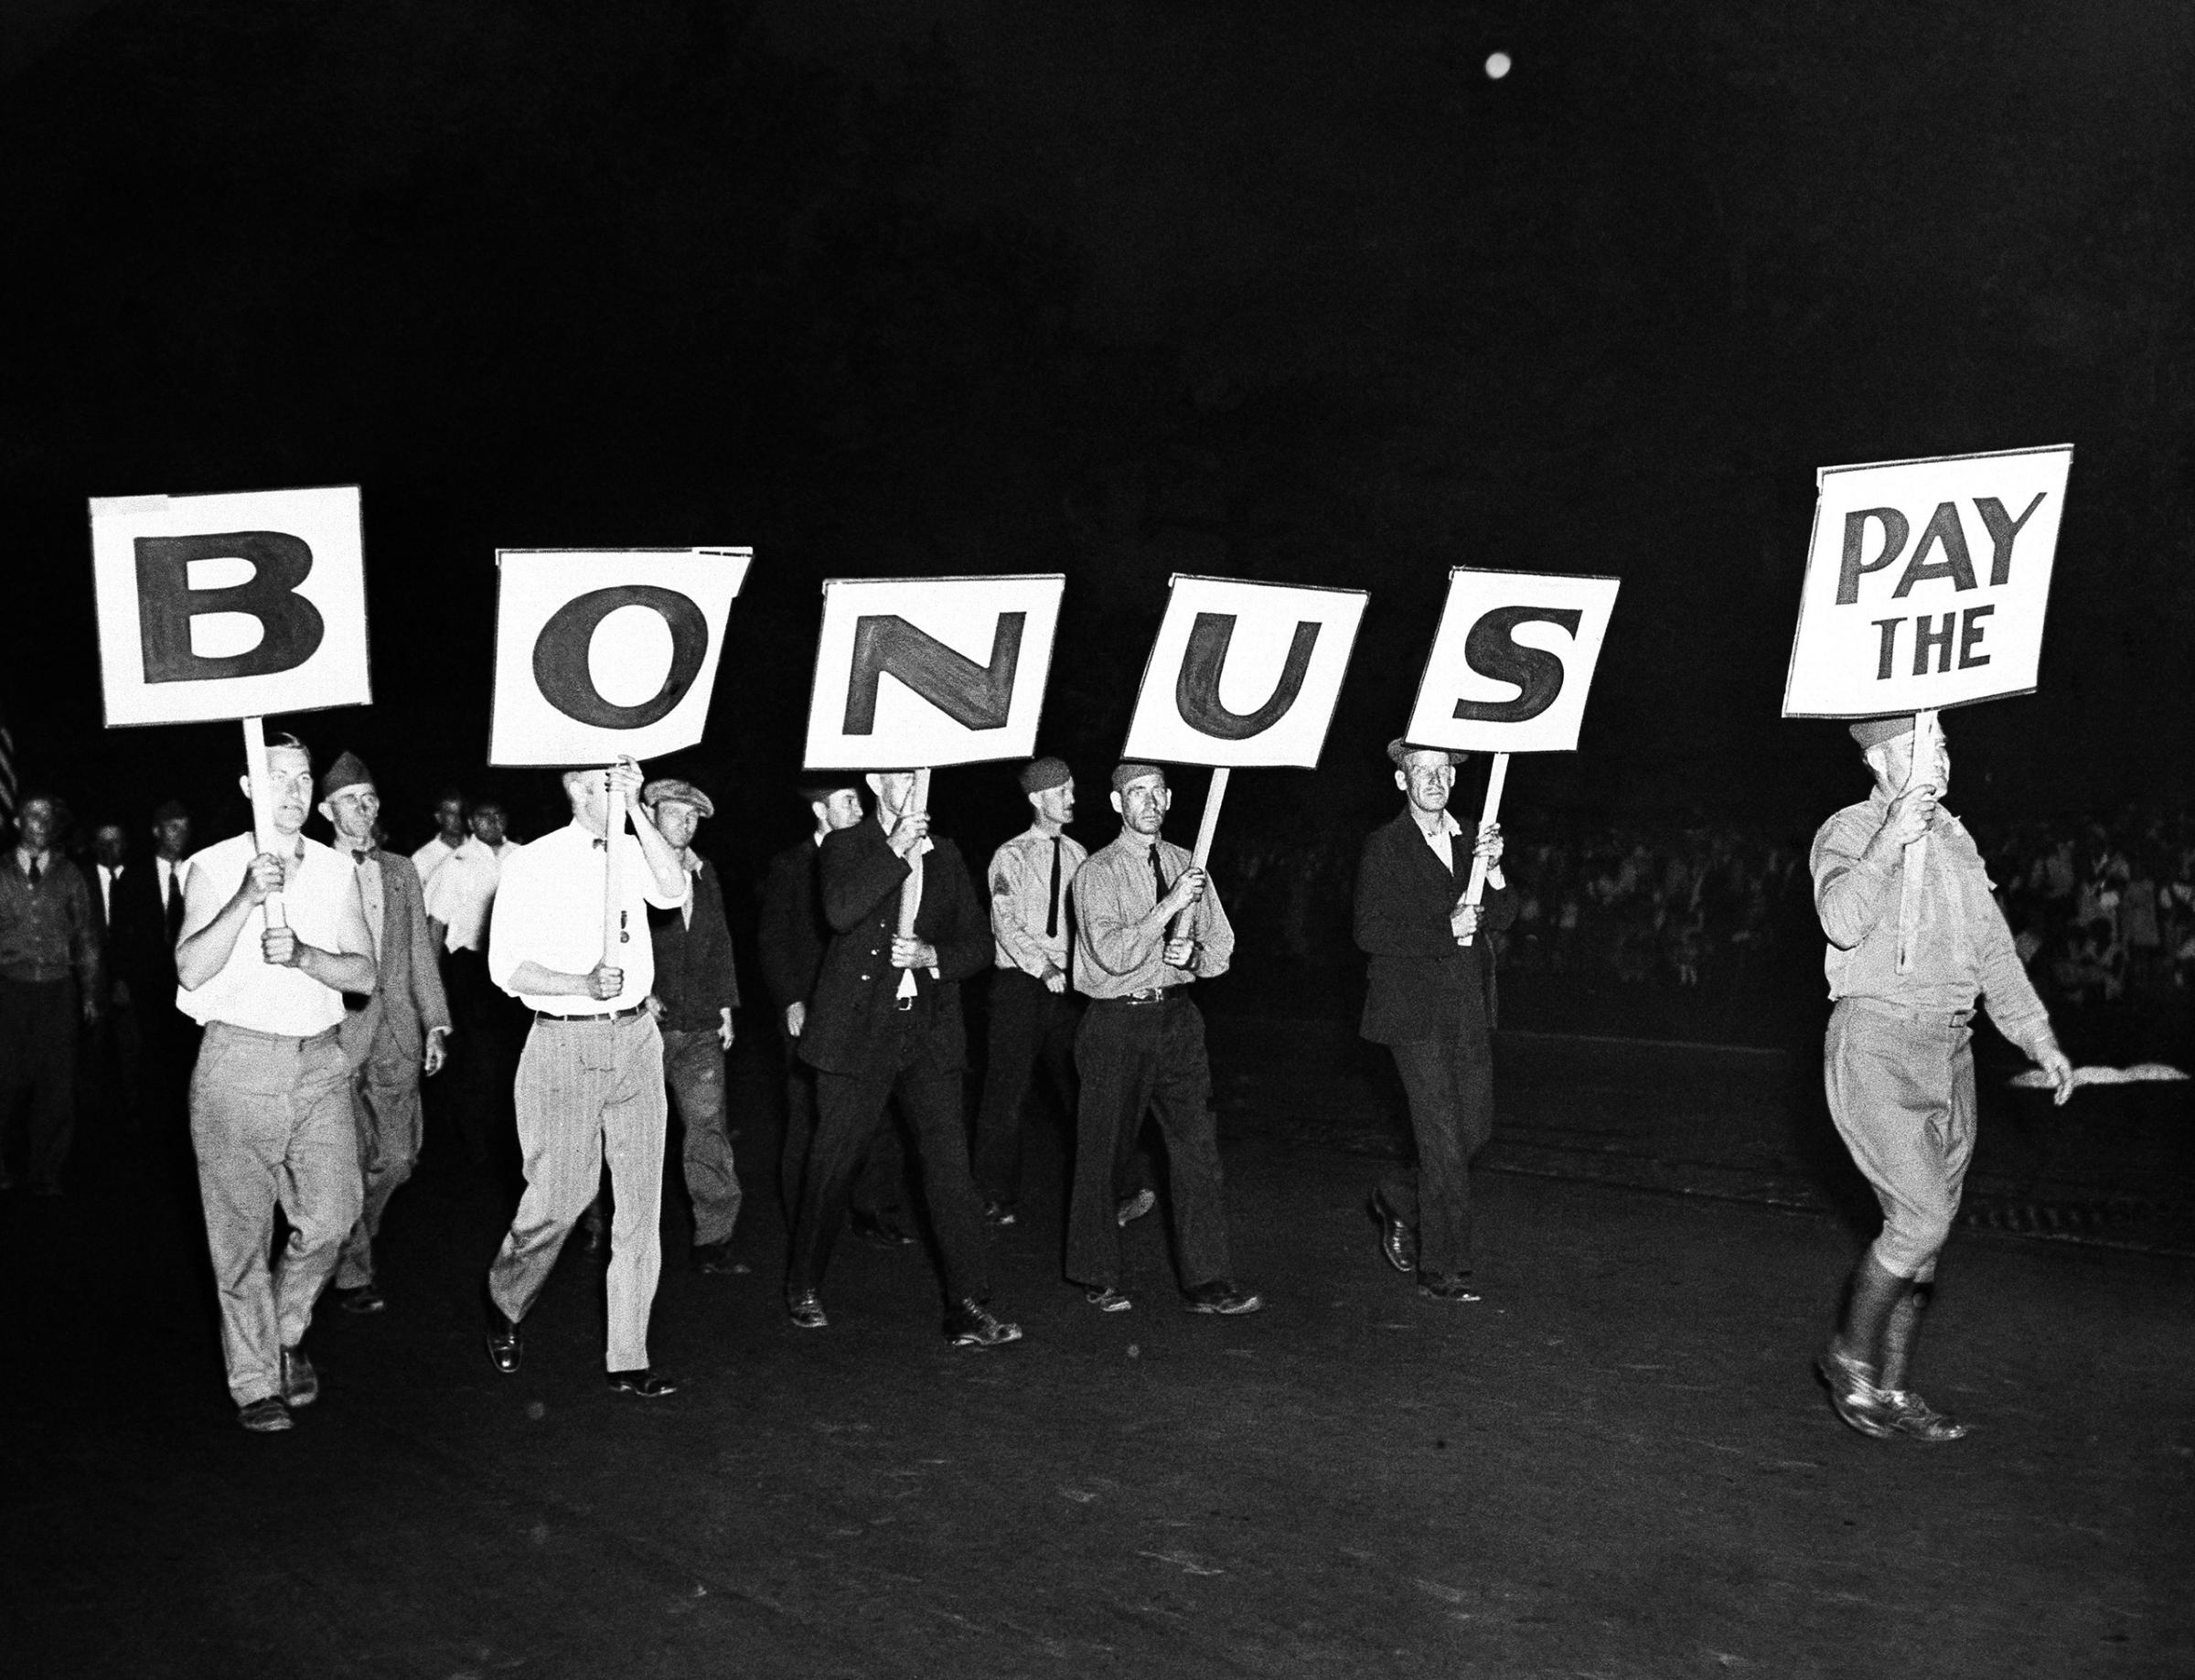 The "Pay The Bonus" sign carried by a group of world war veterans was typical of the banners with which the former soldiers who marched to Washington to press their demands for payments of the soldiers' bonus emphasized their point in the great parade they formed down Pennsylvania Avenue toward the capitol on the evening of June 7, 1932.